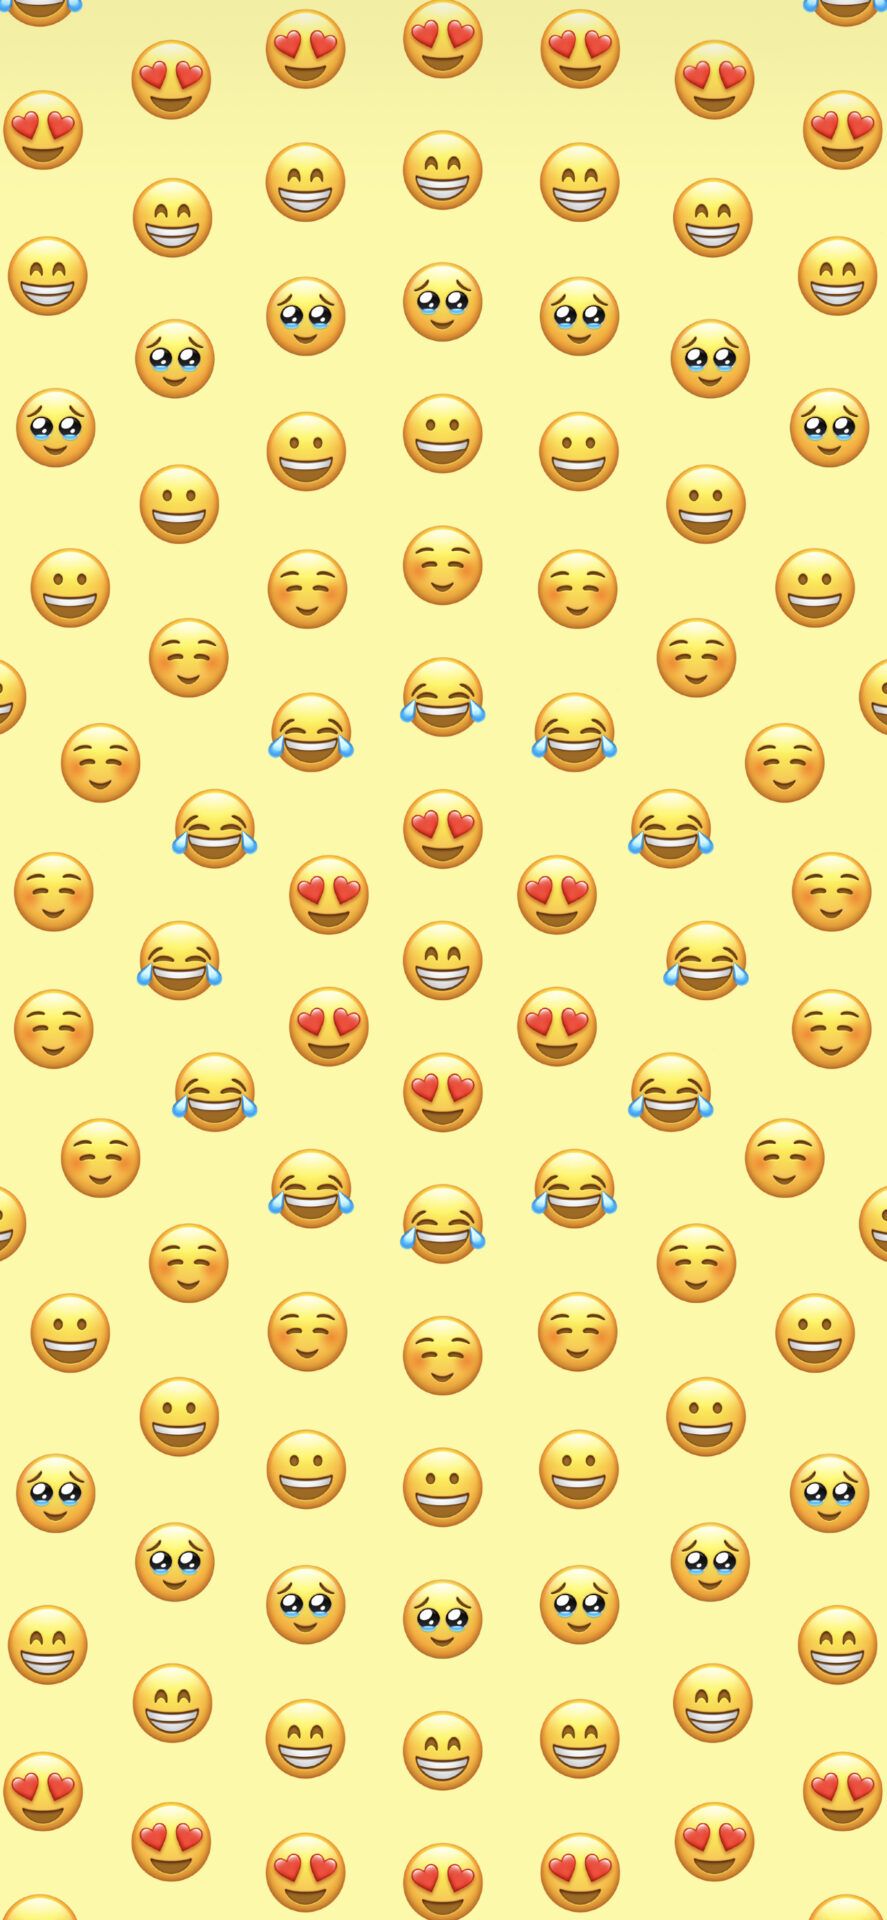 A wallpaper of emojis that are all different types of smiling and laughing - Emoji